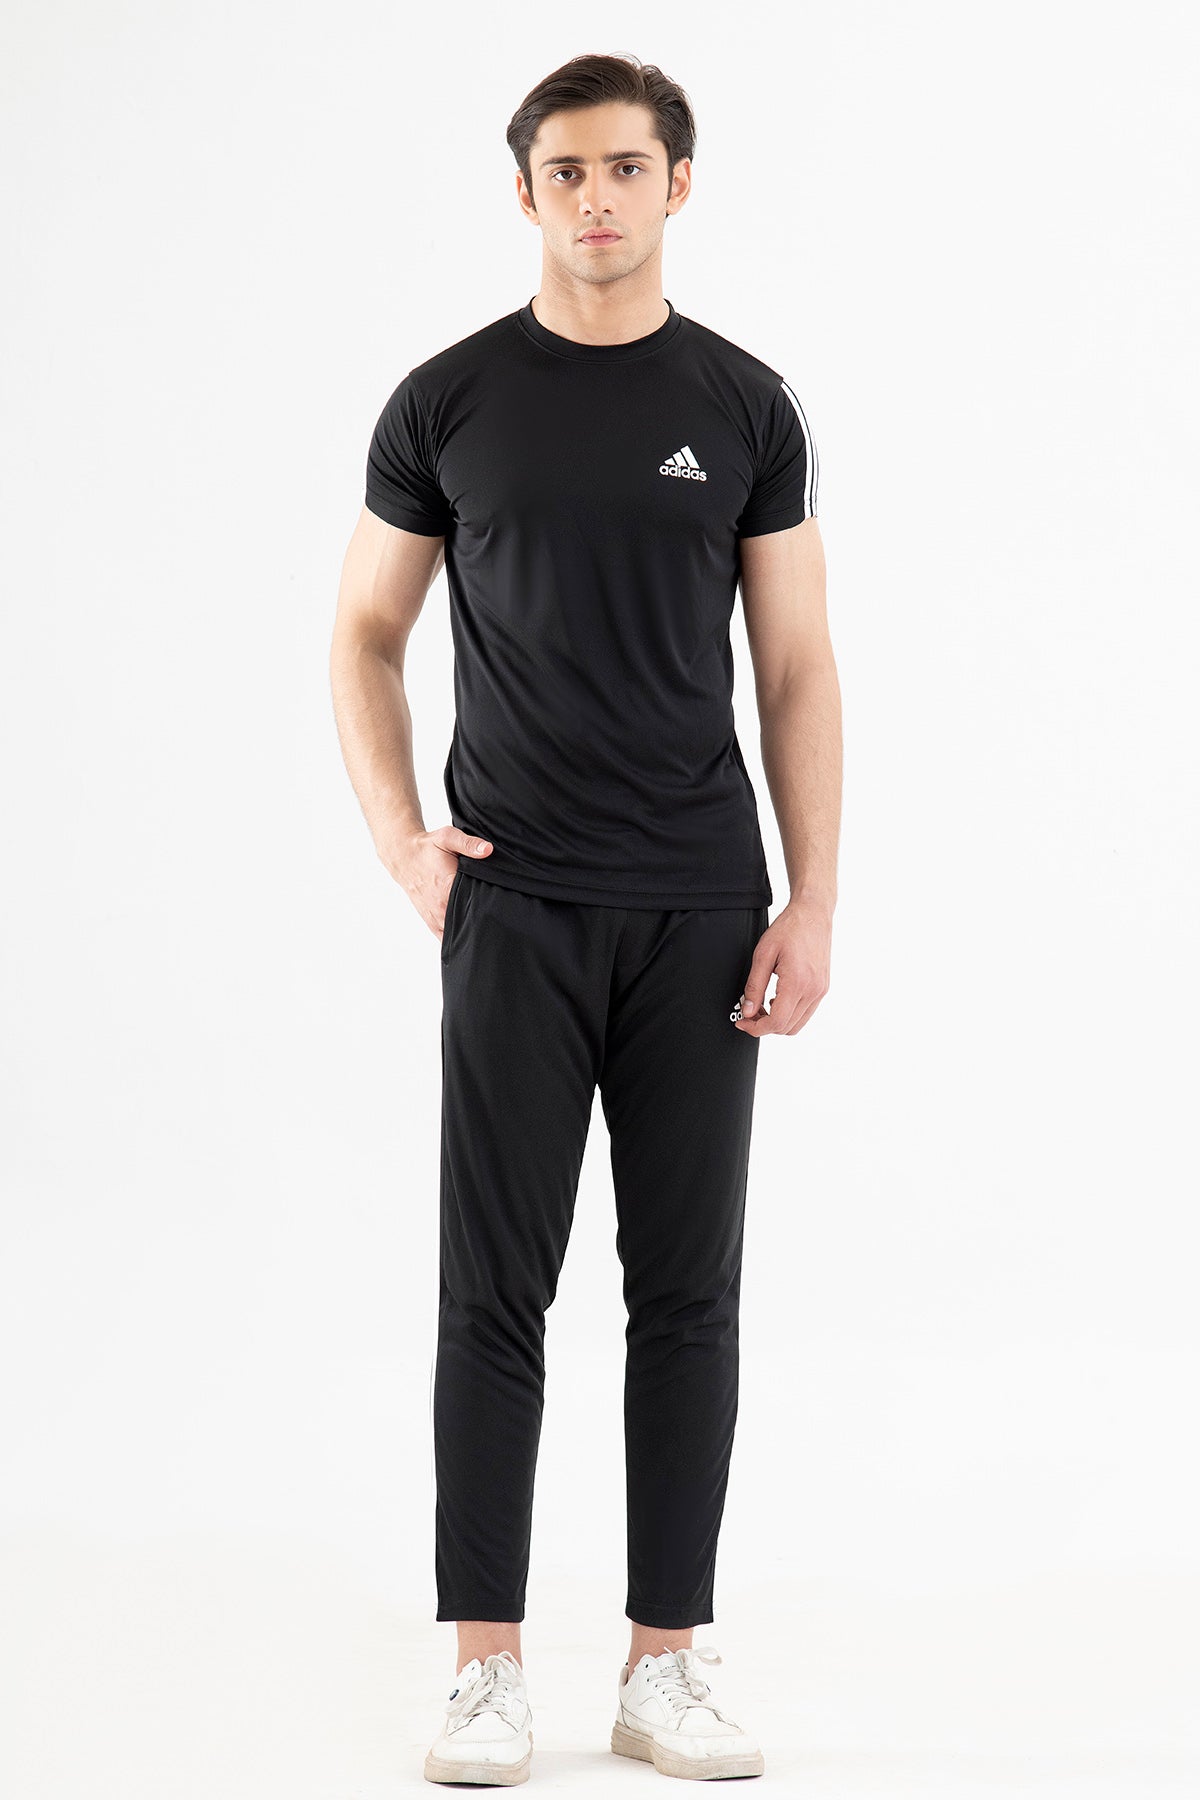 Adidas Dry-Fit Trouser